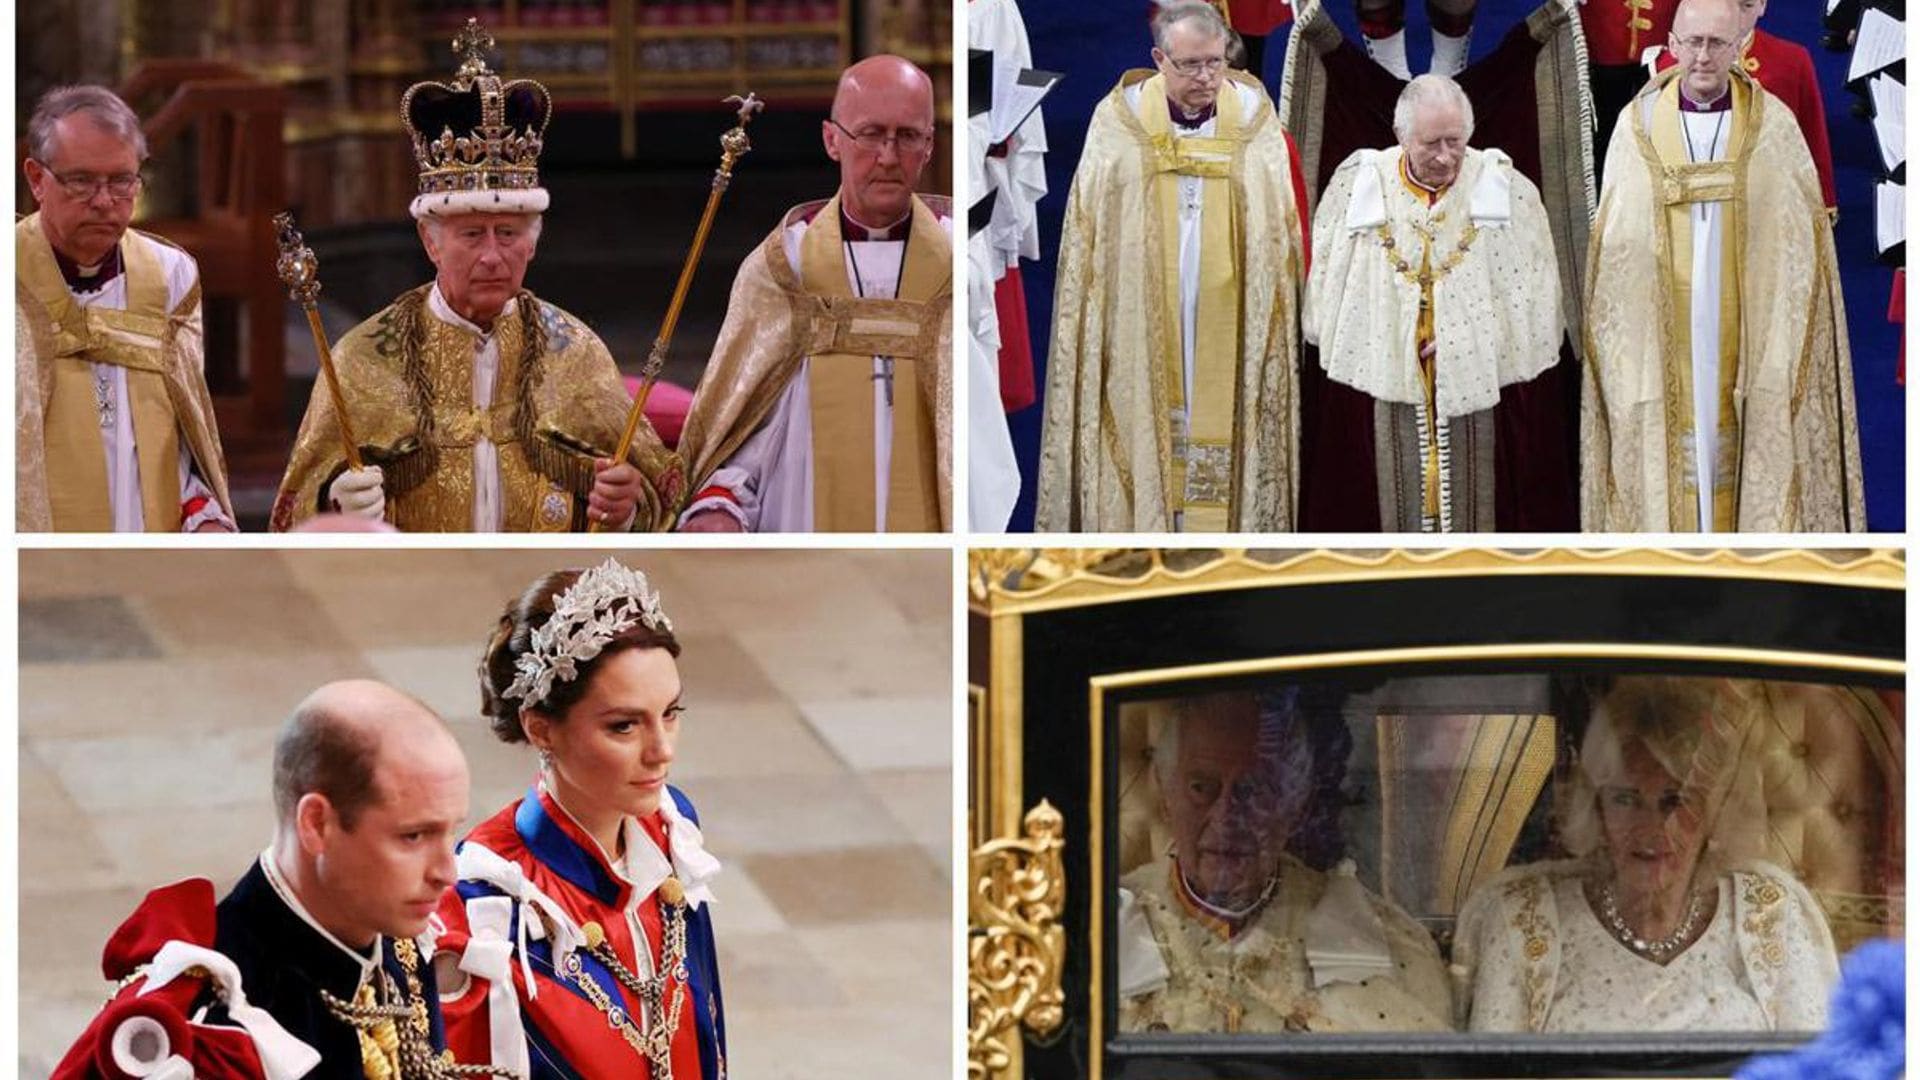 Every must-see photo from King Charles and Queen Camilla’s coronation